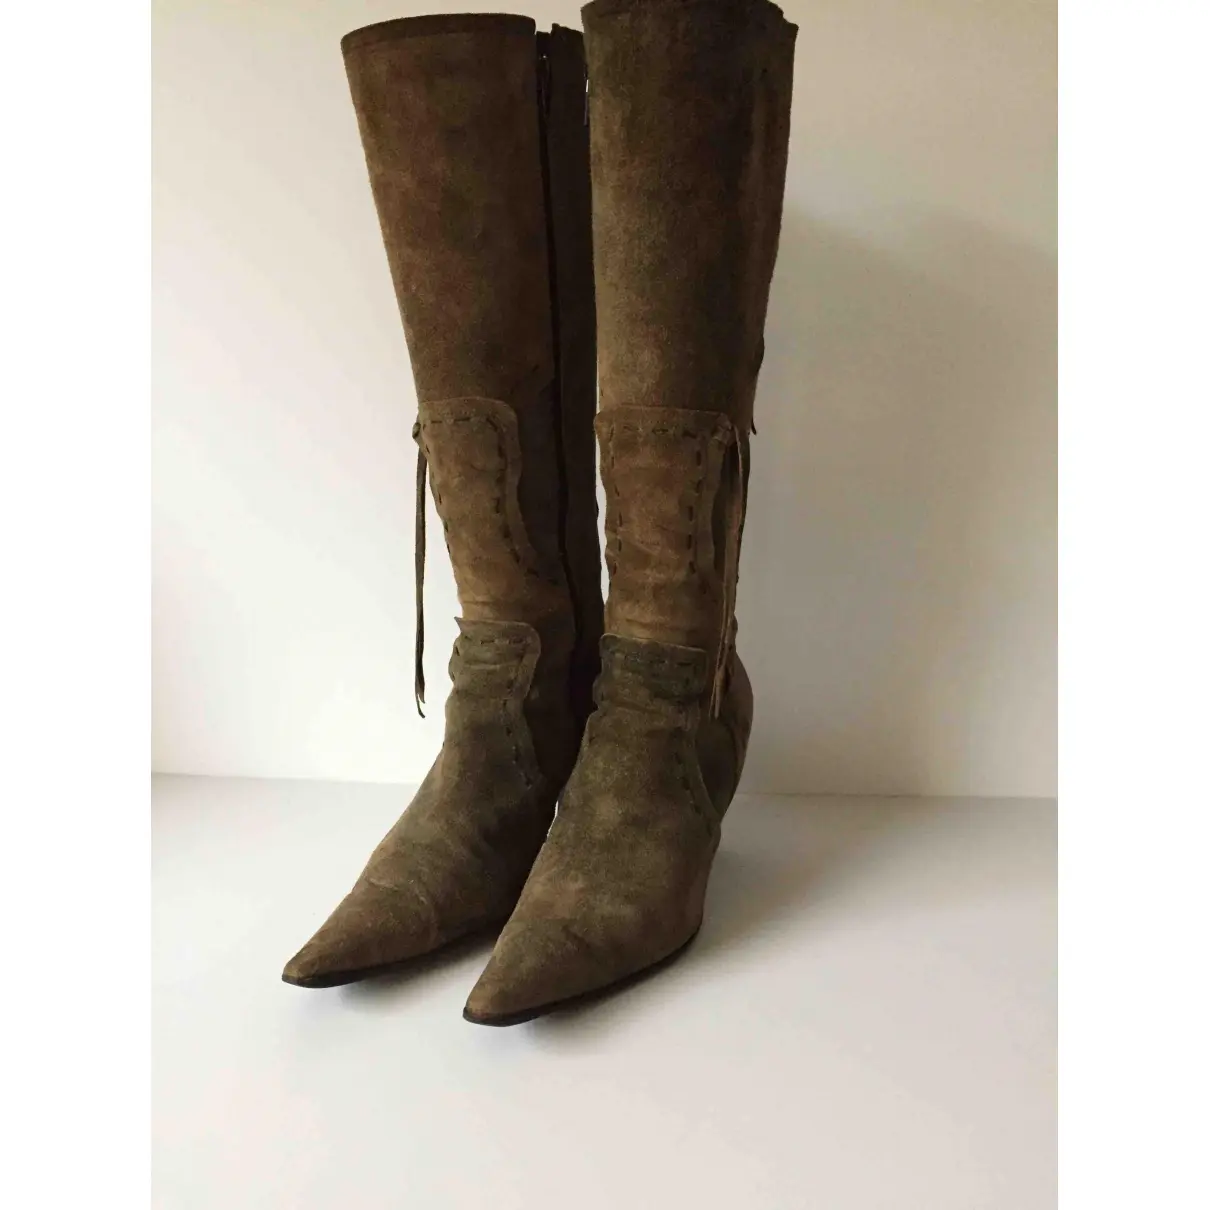 Boots Russell & Bromley - Vintage